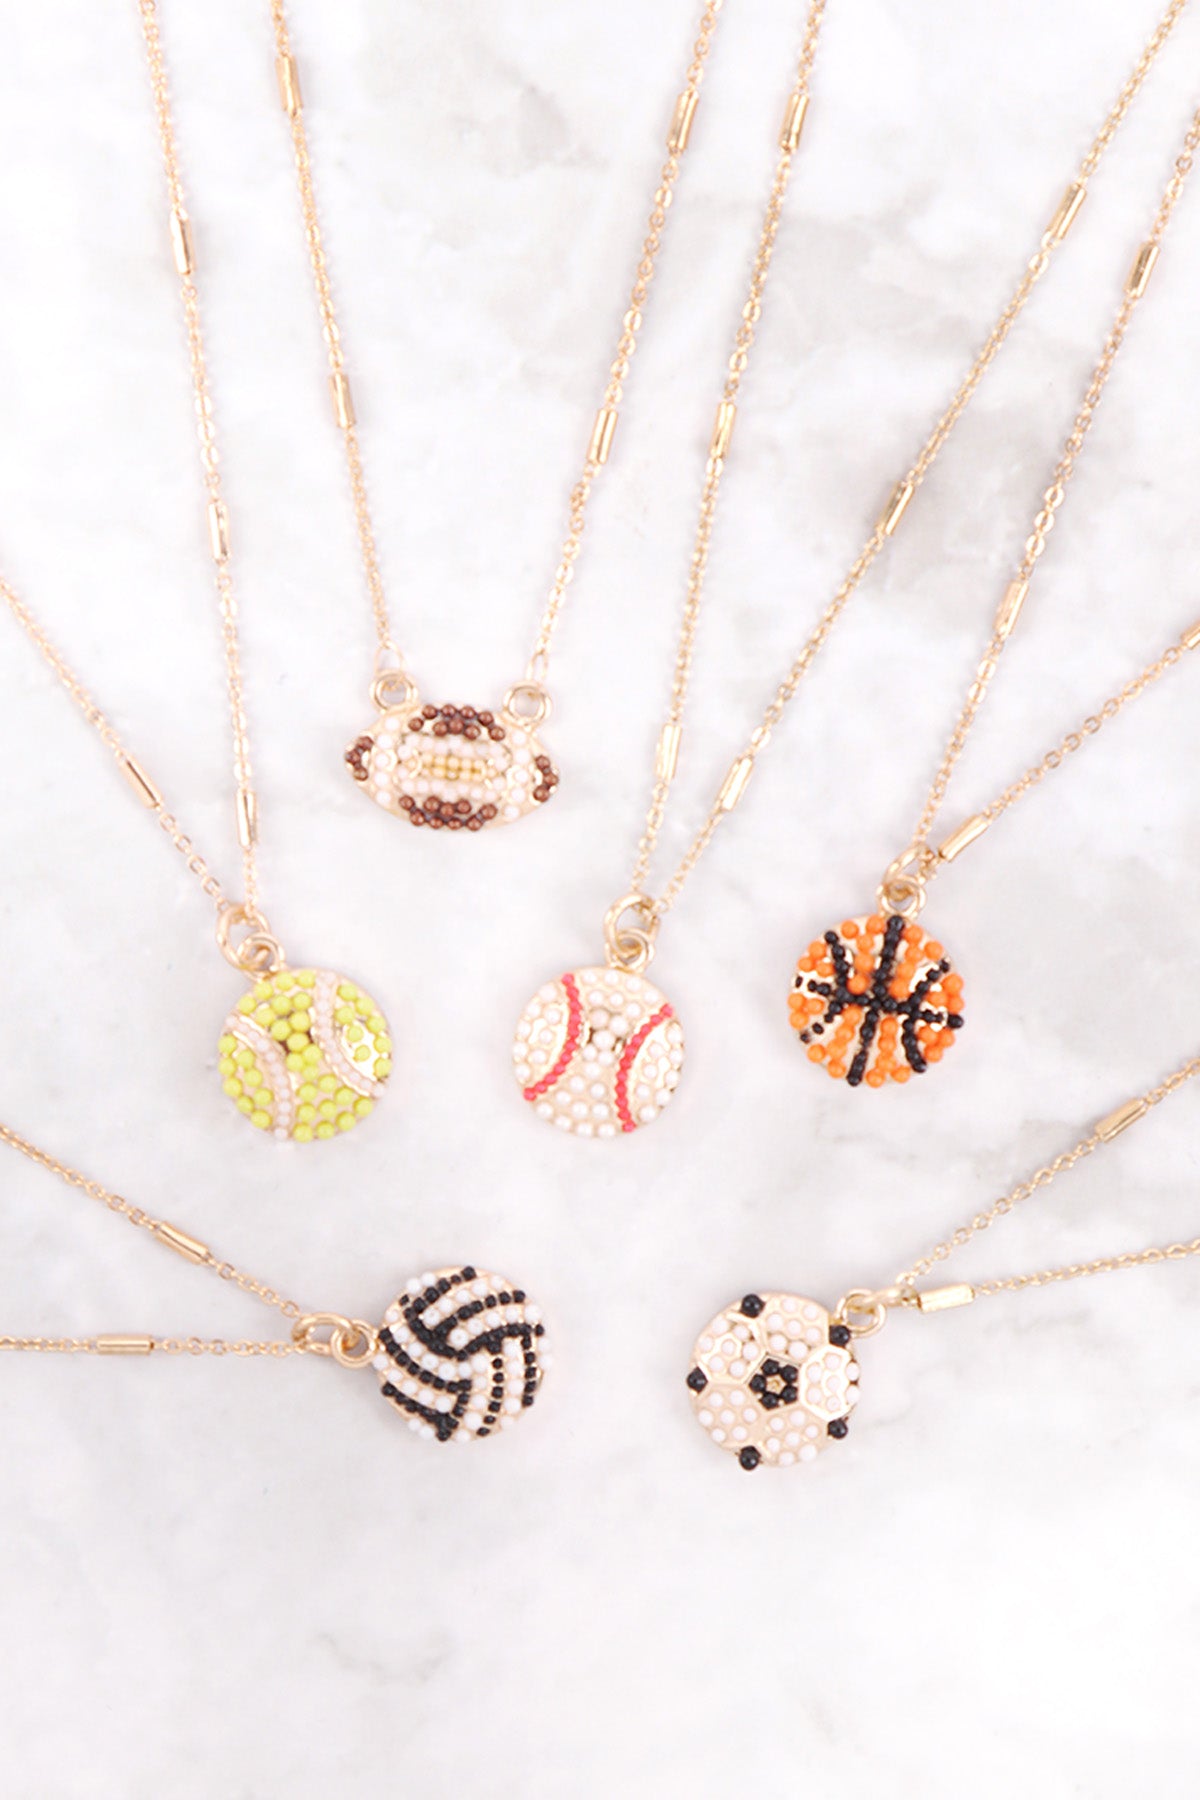 SPORTS GAMEDAY SEED BEAD CHAIN NECKLACE